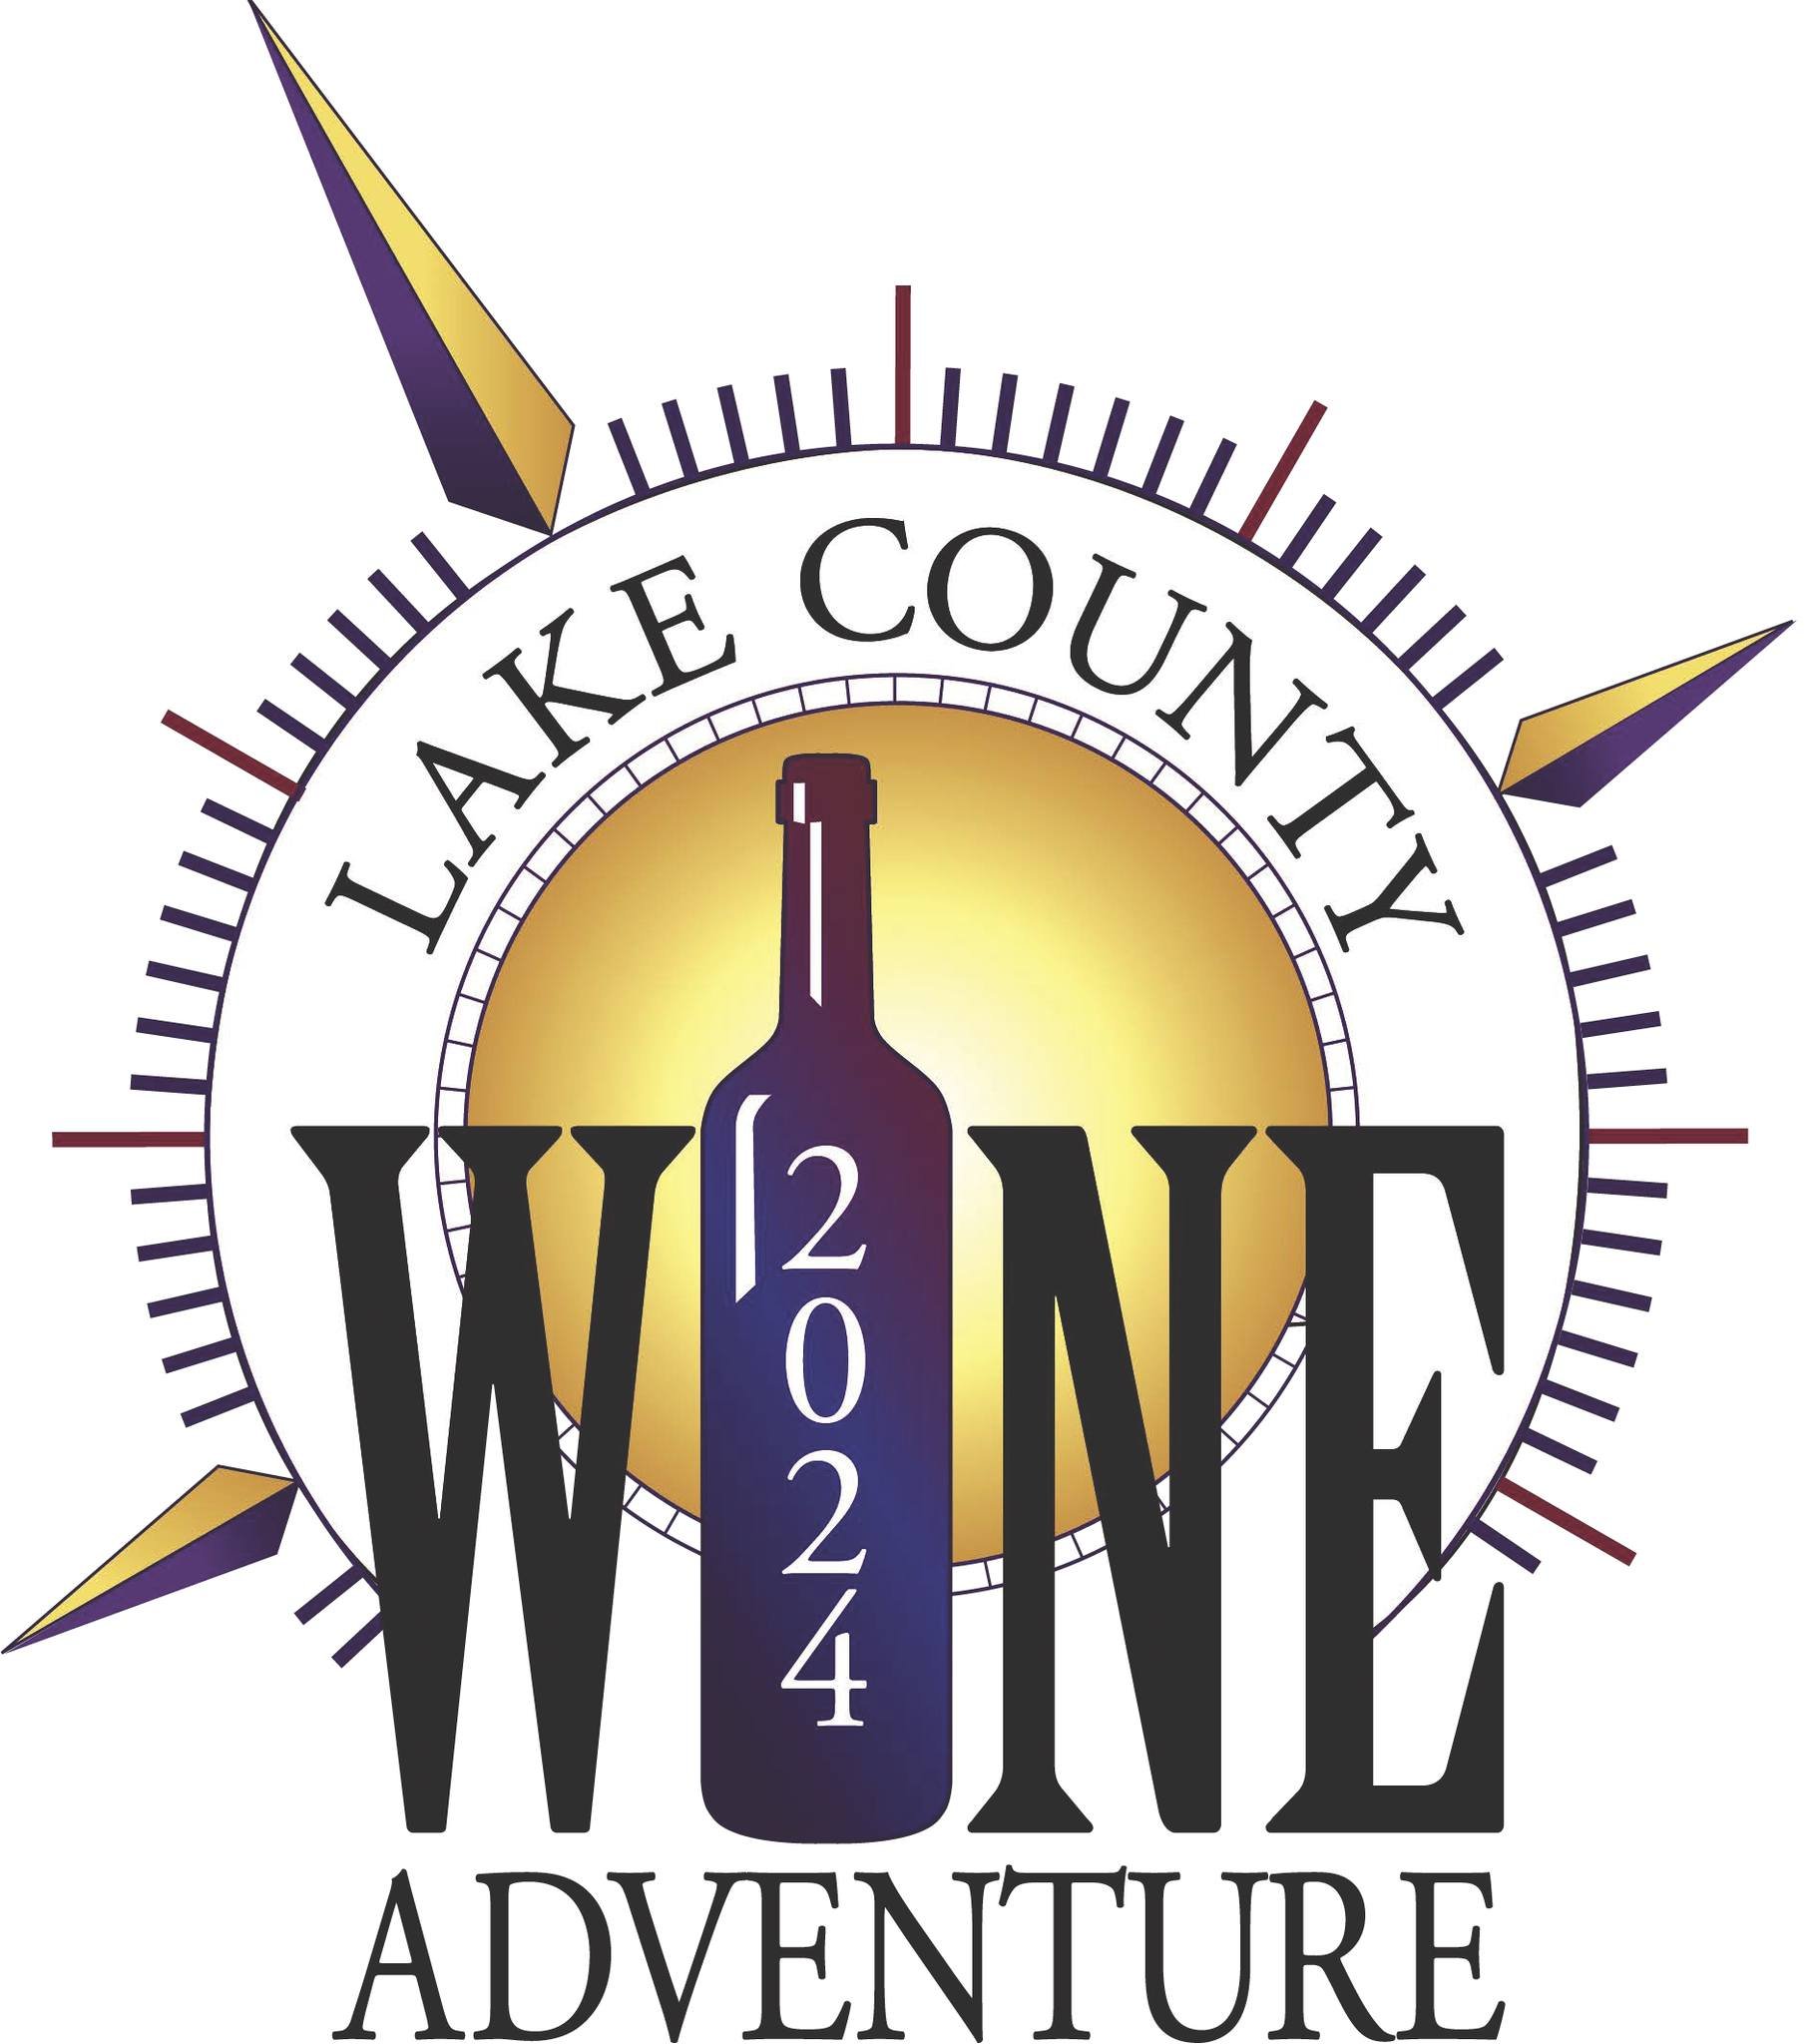 SOL ROUGE WINERY @ LAKE COUNTY WINE ADVENTURE
This Saturday, Sol Rouge Winery will be pouring at our own Tasting Room for the first time at the Lake County Wine Adventure!  After nearly 20 years in Lake County, we FINALLY have our own tasting room in